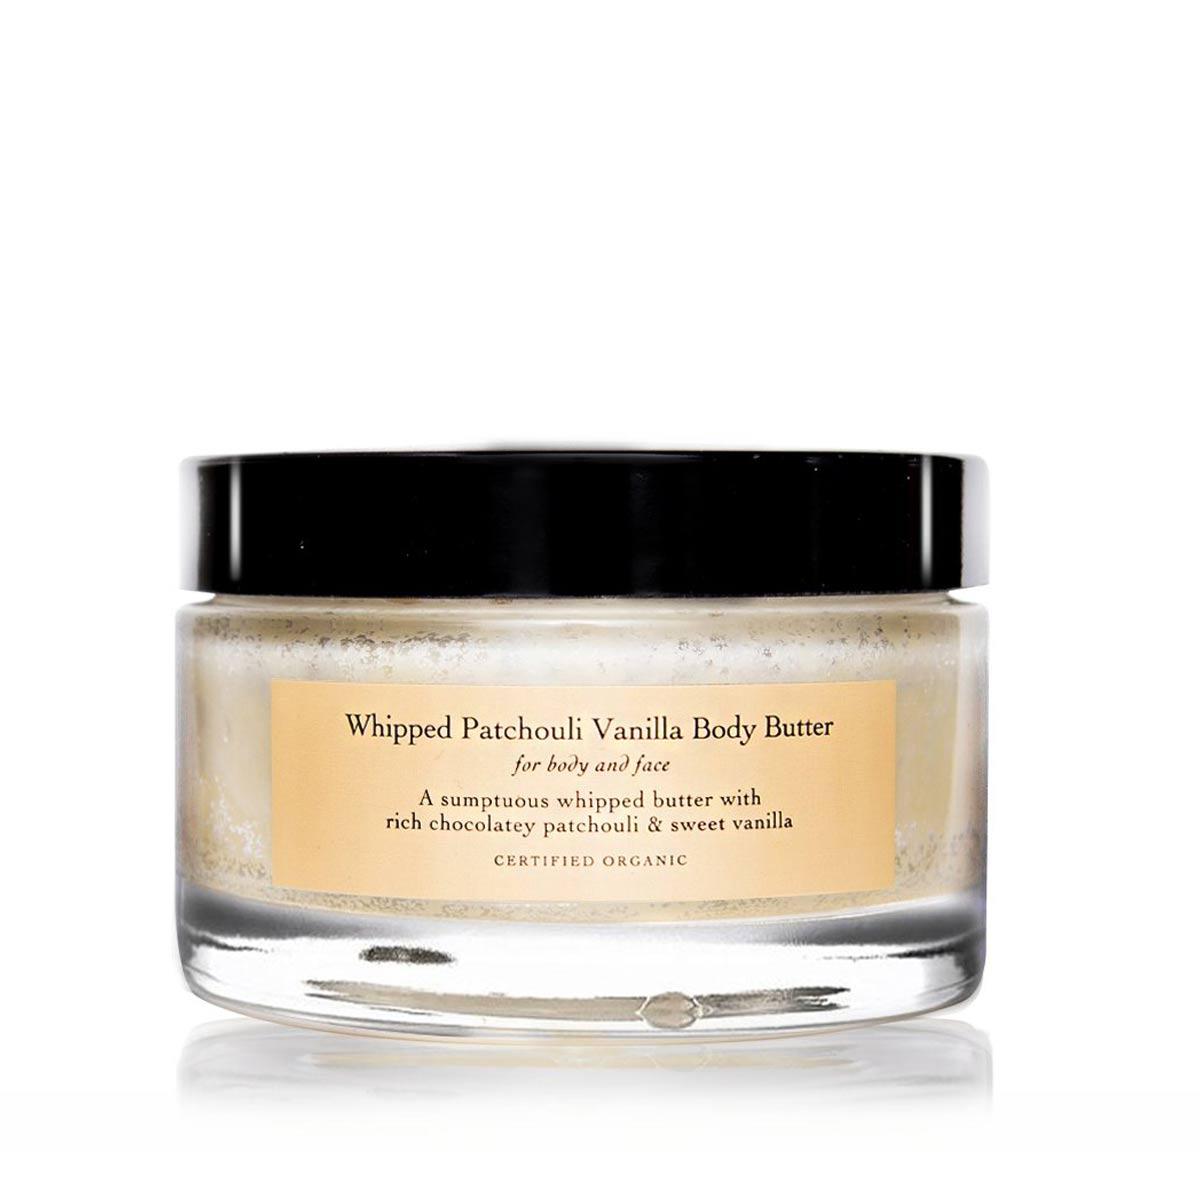 Primary image of Whipped Patchouli Vanilla Body Butter